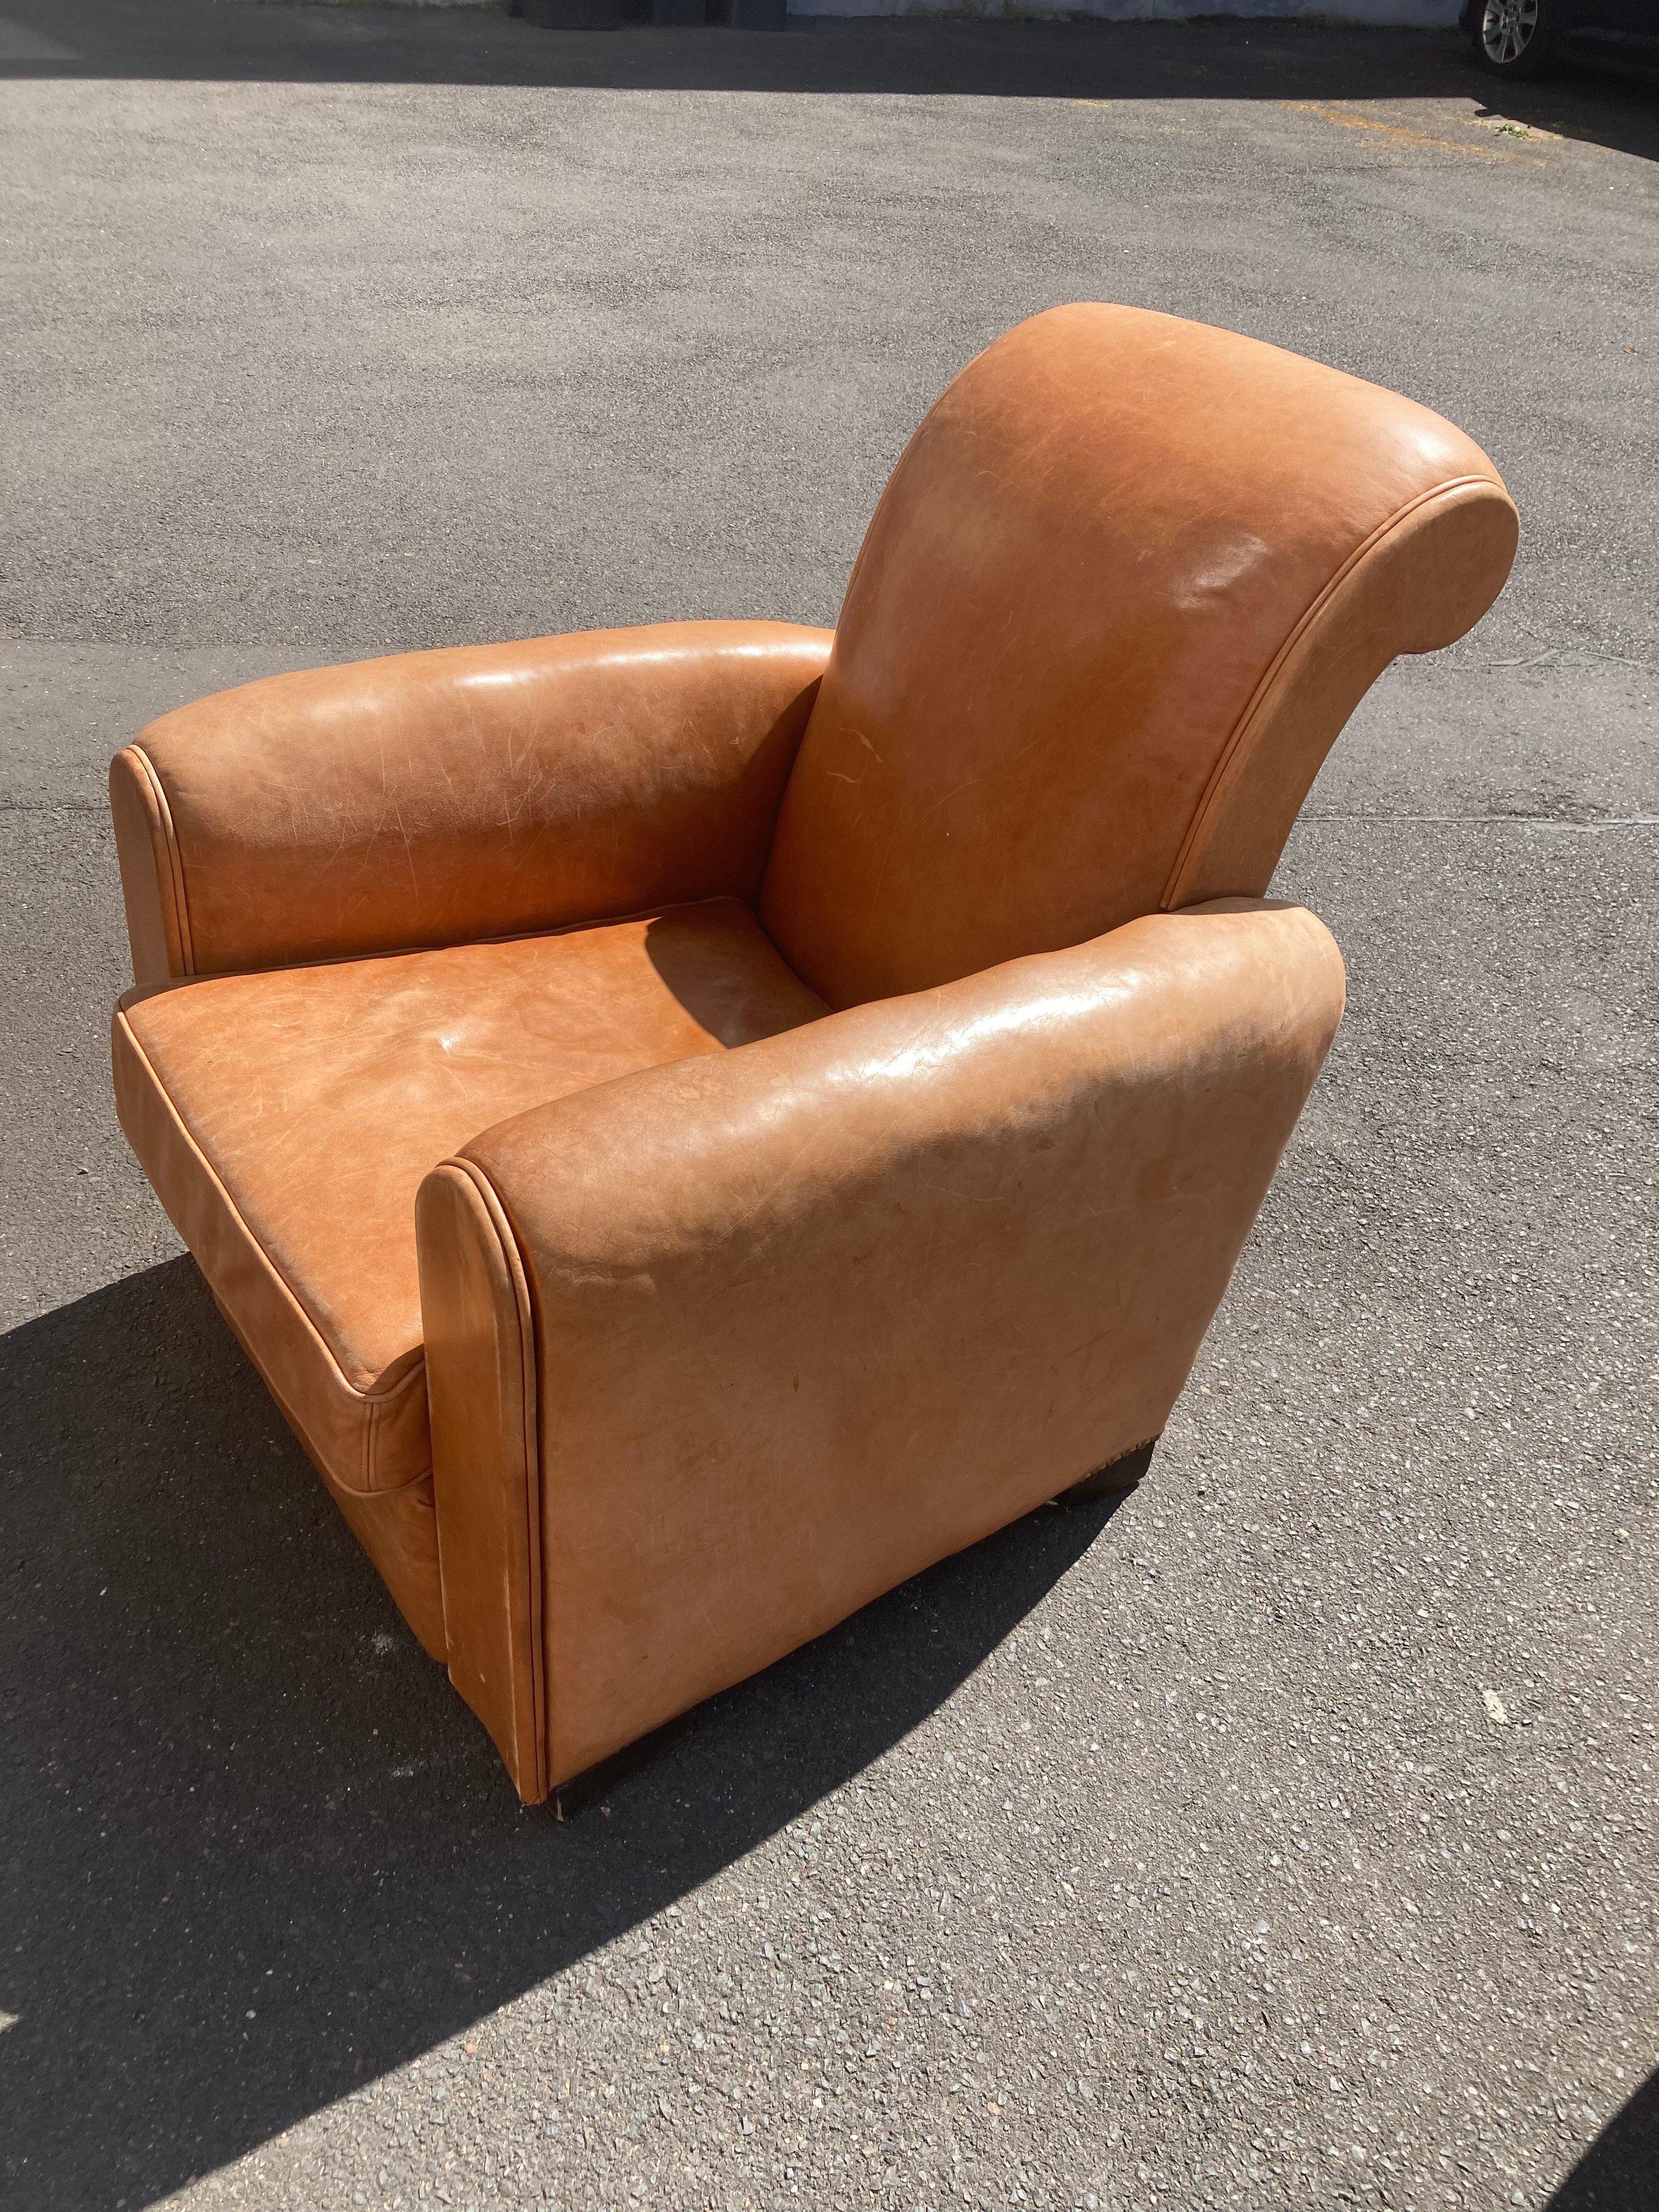 Large Art Déco leather Club Chair. France 1930s.
The Club Chair is in good Original condition from the 1930s.
Light brown leather, slightly cognac-colored.
Rare beautiful Design, the two fronts of the Club Chair are made of leather -covered wood. No